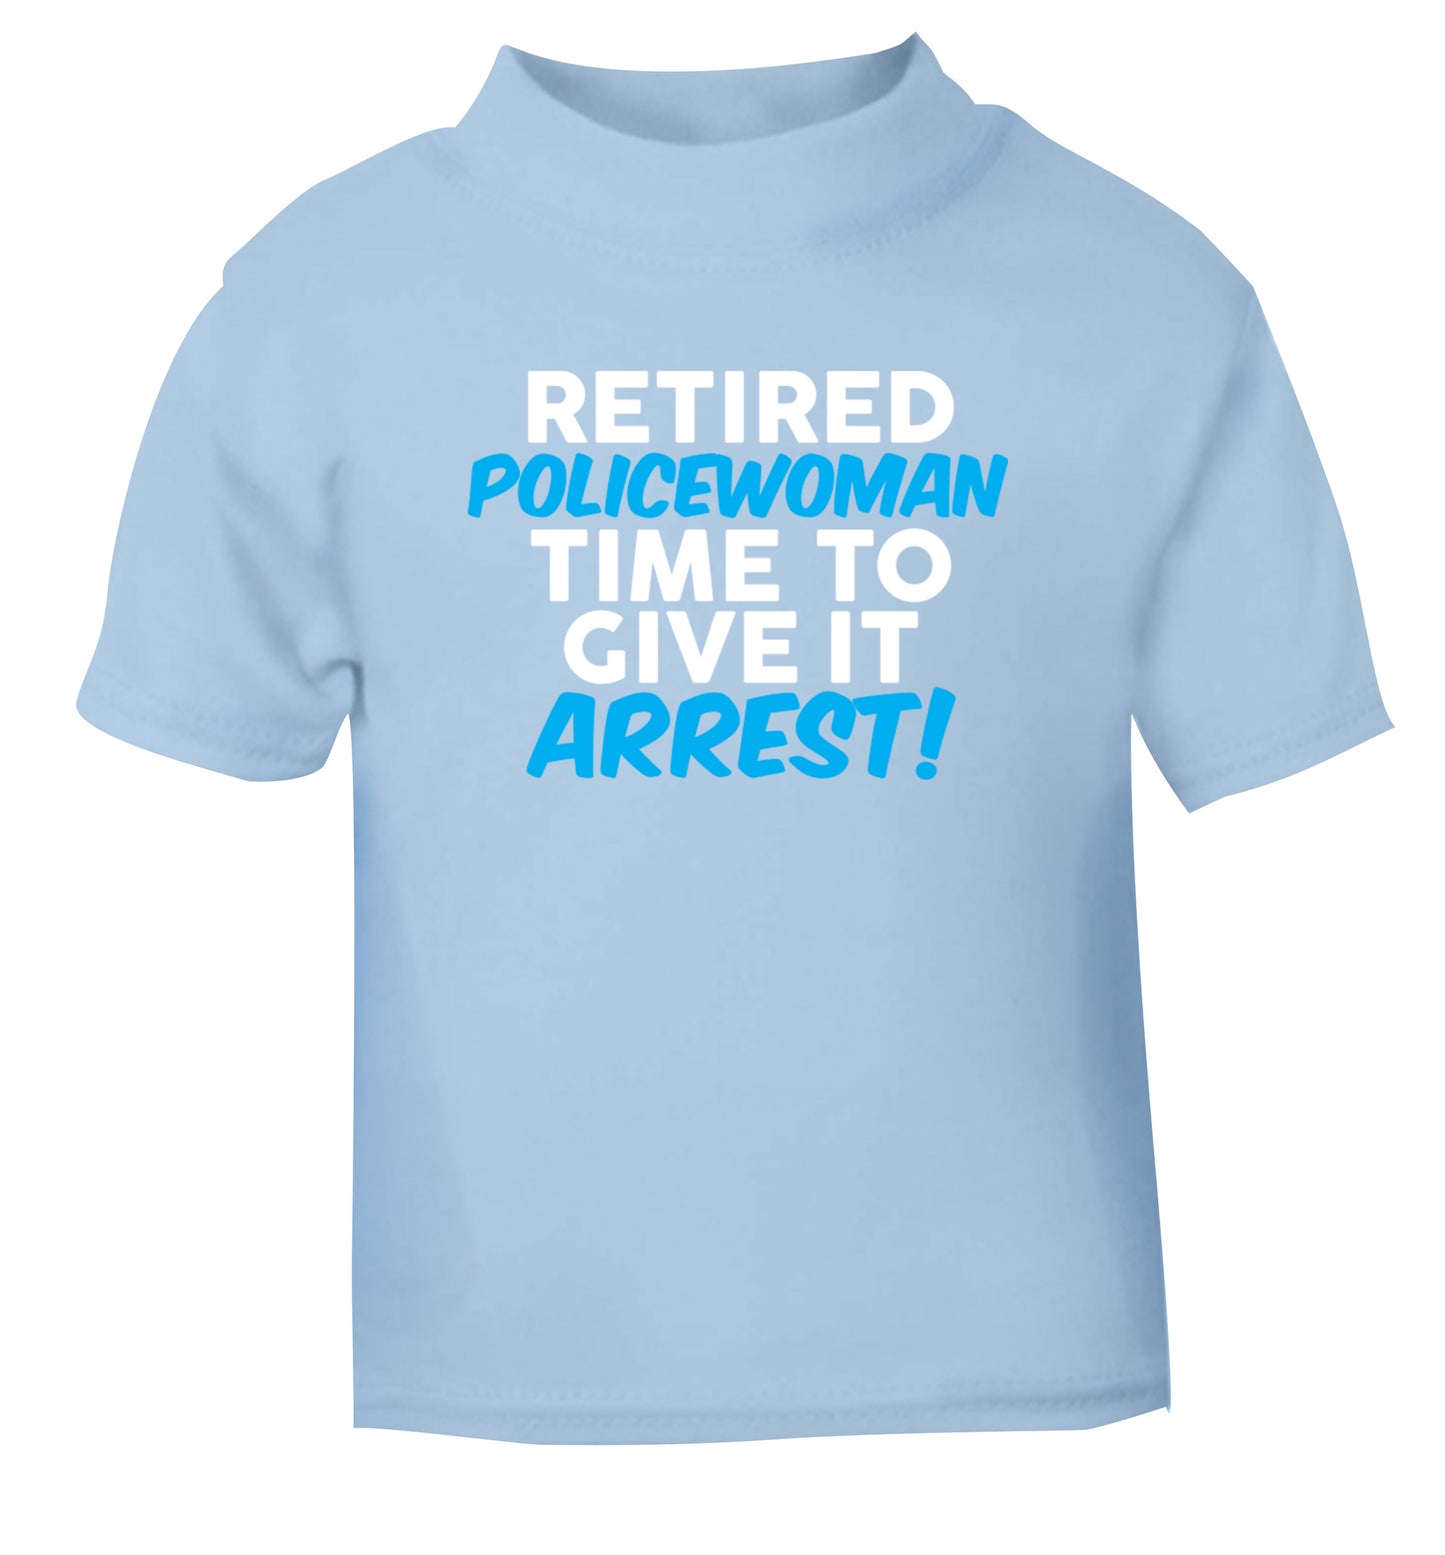 Retired policewoman time to give it arrest light blue Baby Toddler Tshirt 2 Years